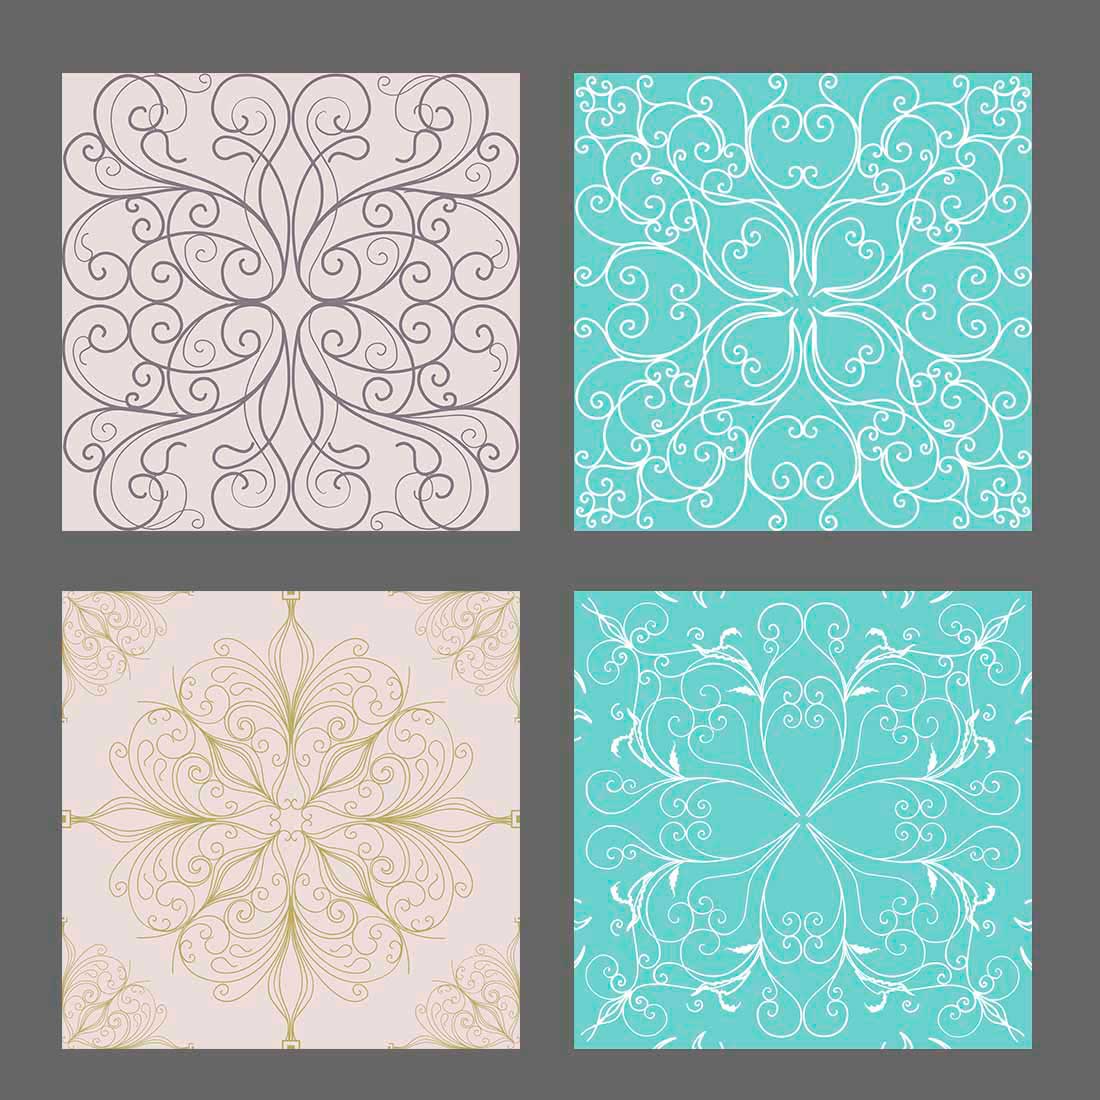 A pack of images of enchanting patterns in the Baroque style.